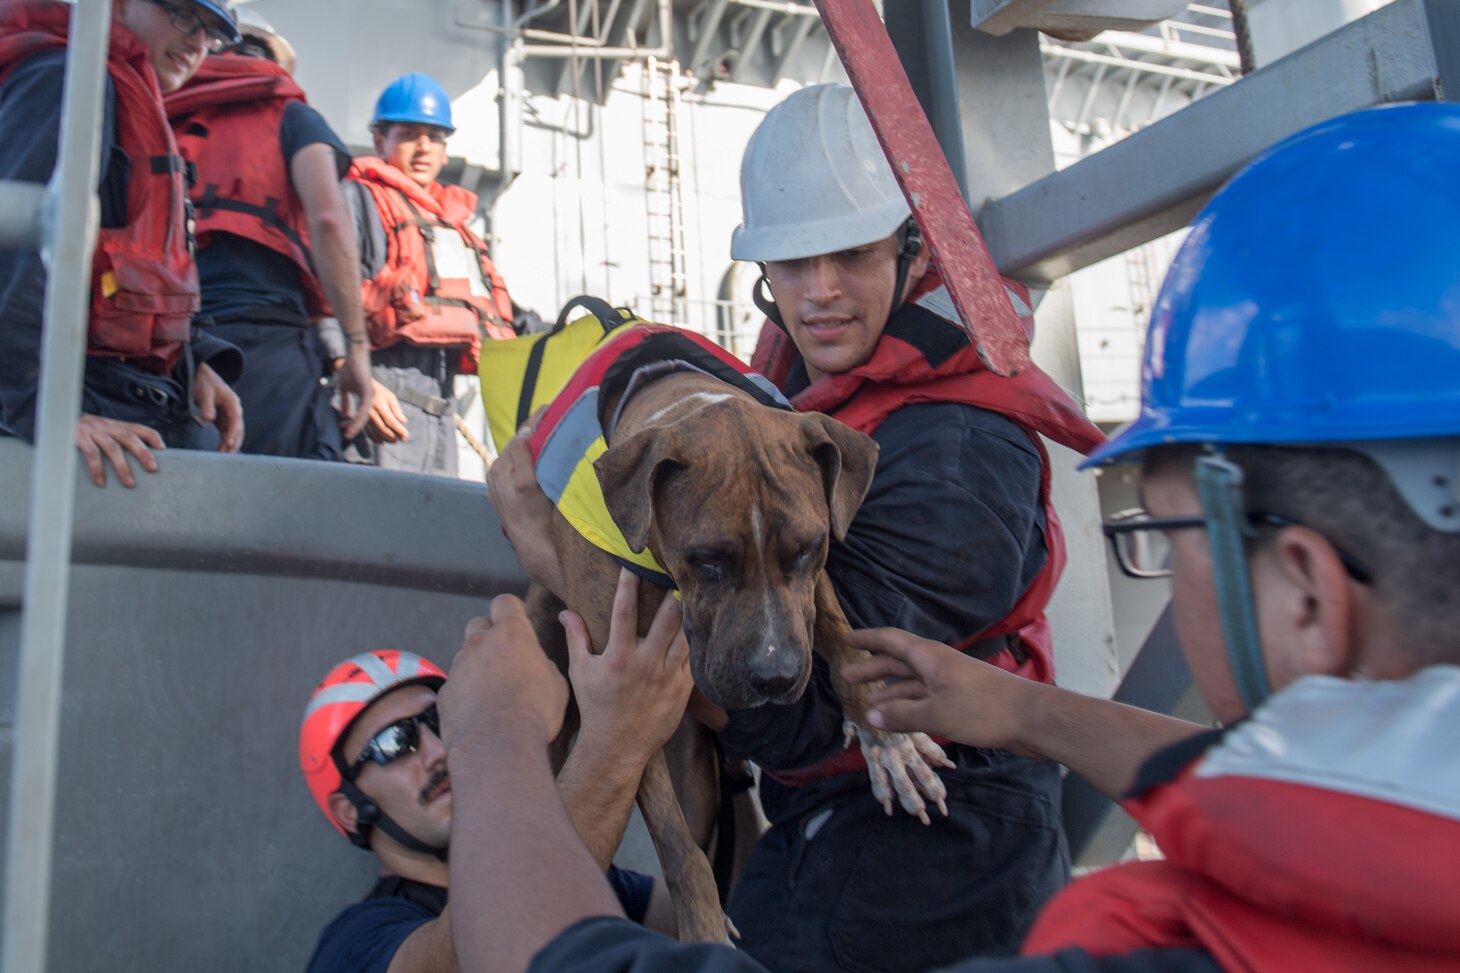 PACIFIC OCEAN (Oct. 25, 2017) Sailors help Zeus, one of twos dogs who were accompanying two mariners who were aided by the amphibious dock landing ship USS Ashland (LSD 48). Ashland, operating in the Indo-Asia-Pacific region on a routine deployment, rescued two American mariners who had been in distress for several months after their sailboat had a motor failure and had strayed well off its original course while traversing the Pacific Ocean.